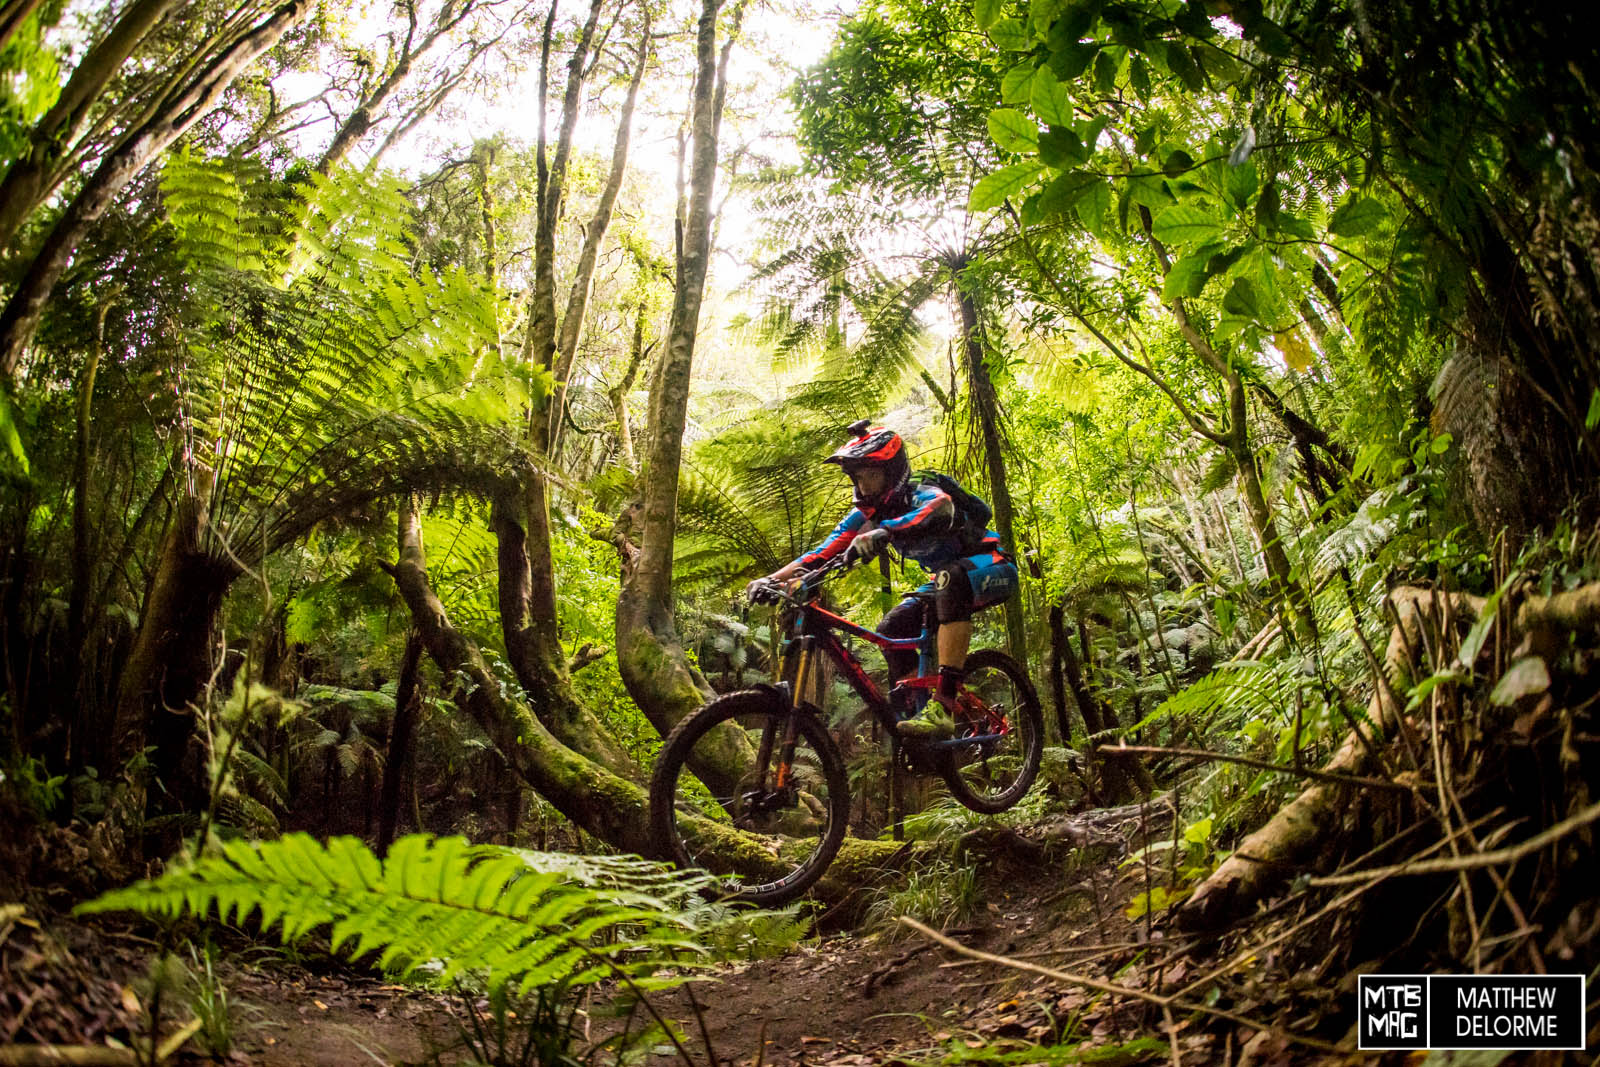 Nico Lau having no troubles in the slick rooty woods.